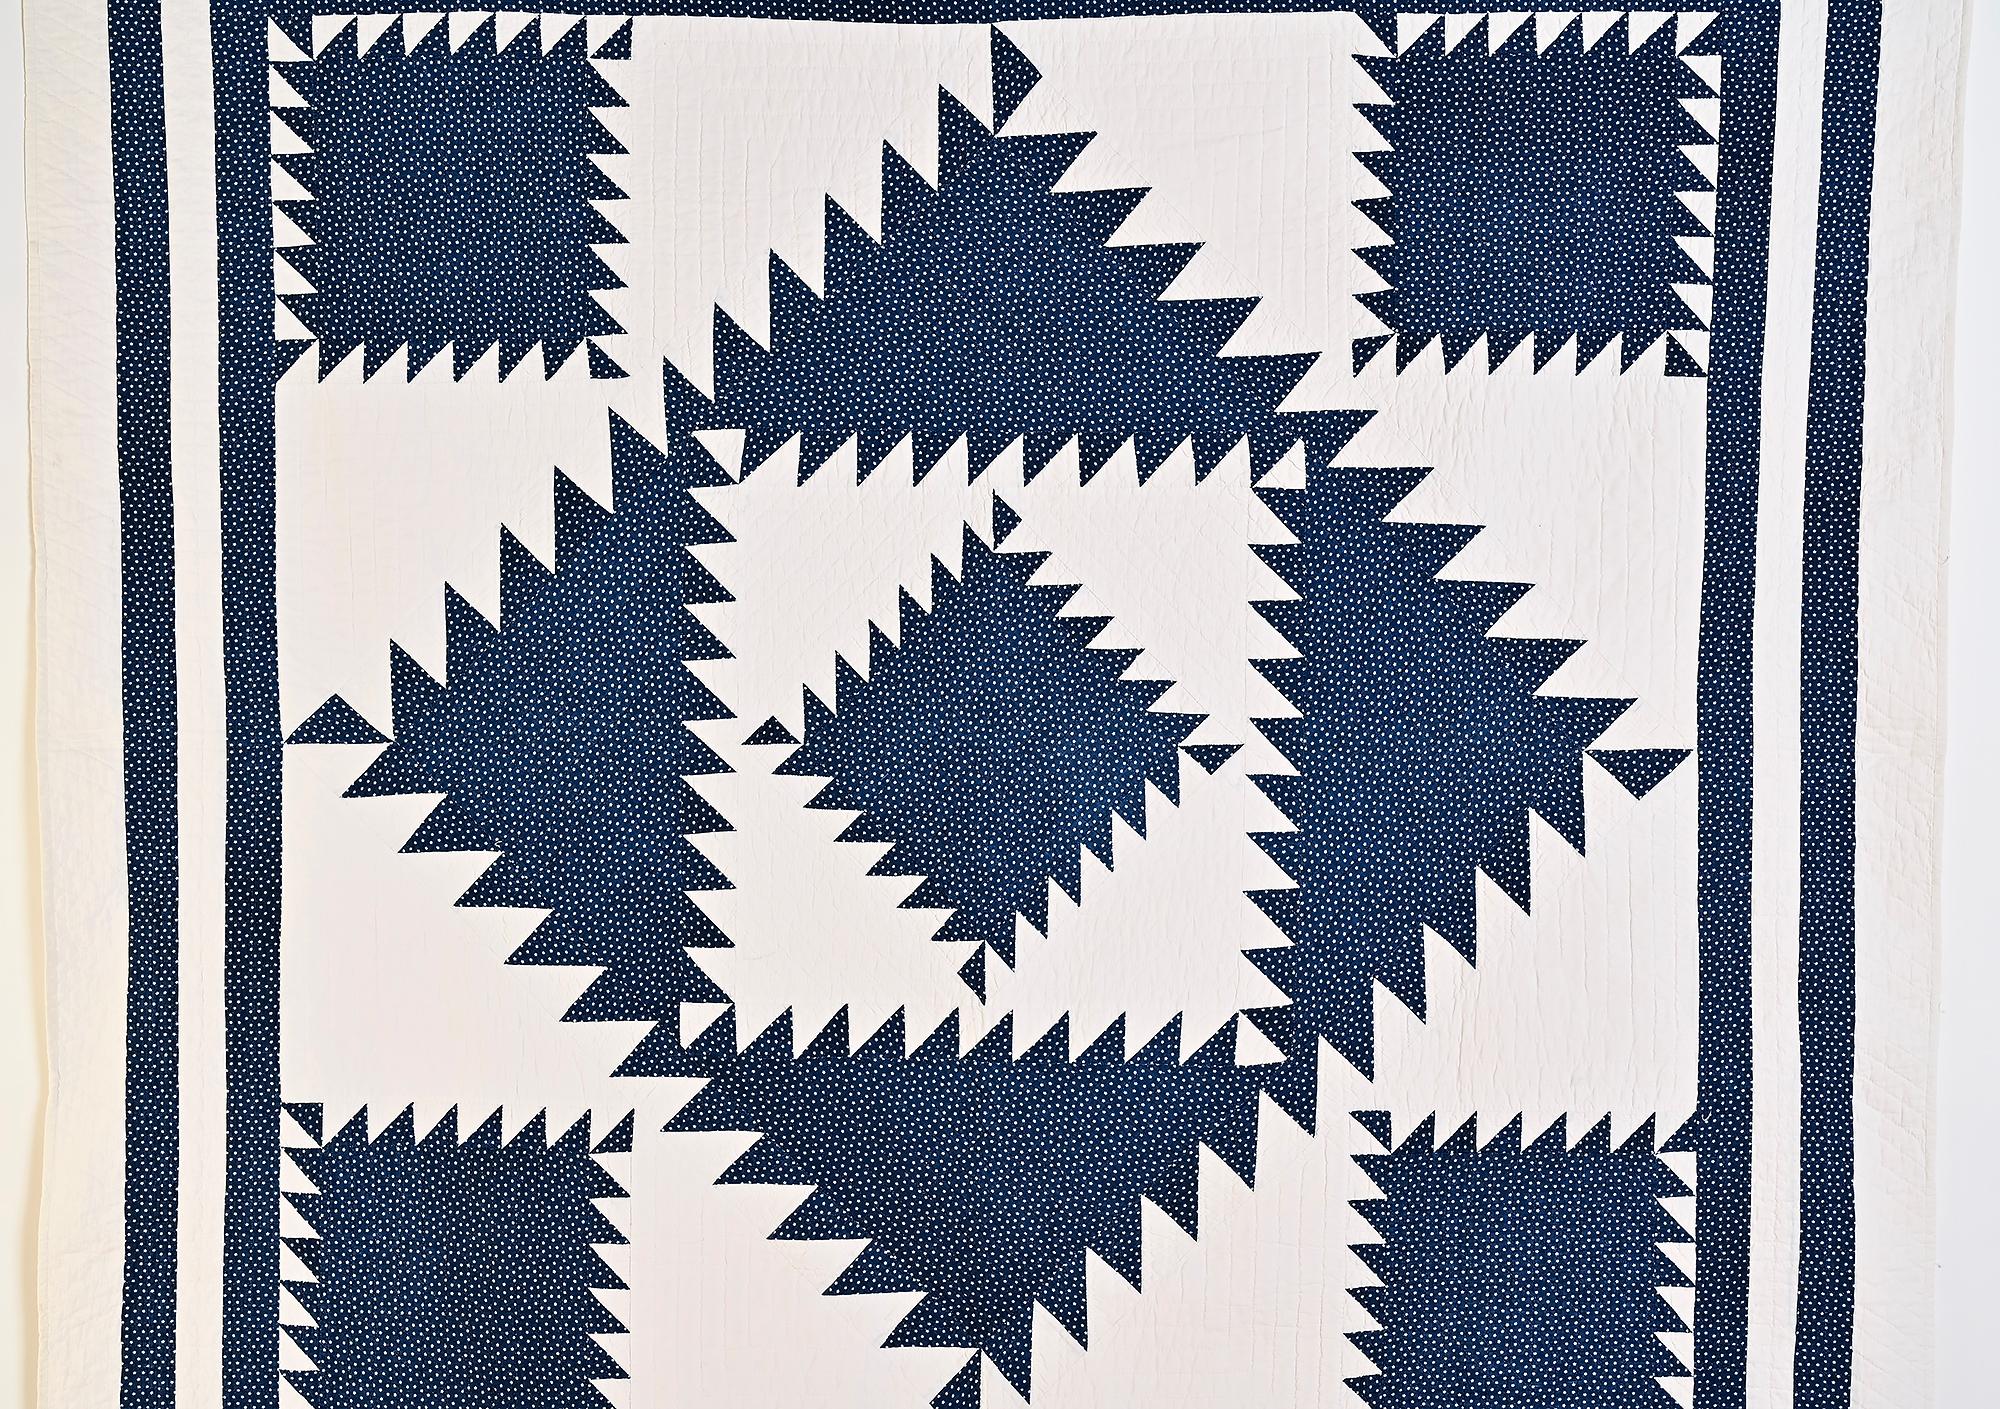 Bold and striking Sawtooth Diamond quilt in one of the most desirable color combinations of indigo and white. The central pattern is framed by four sawtooth squares, an unusual touch. Four borders also add to the strength of the design. Everything